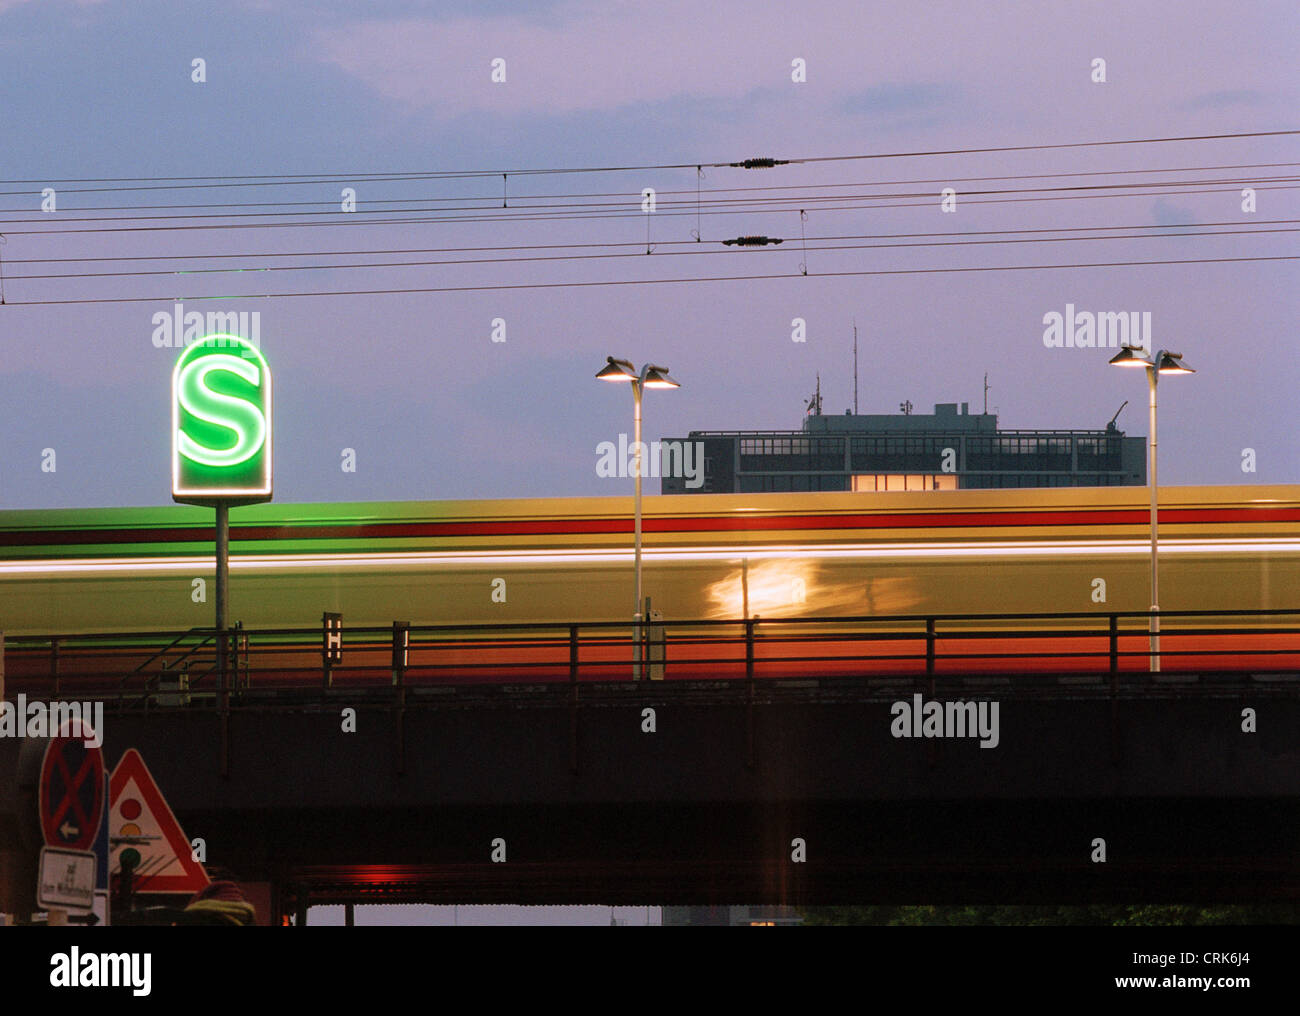 An S-Bahn train in the dusk with the glowing green logo of the S-Bahn Stock Photo